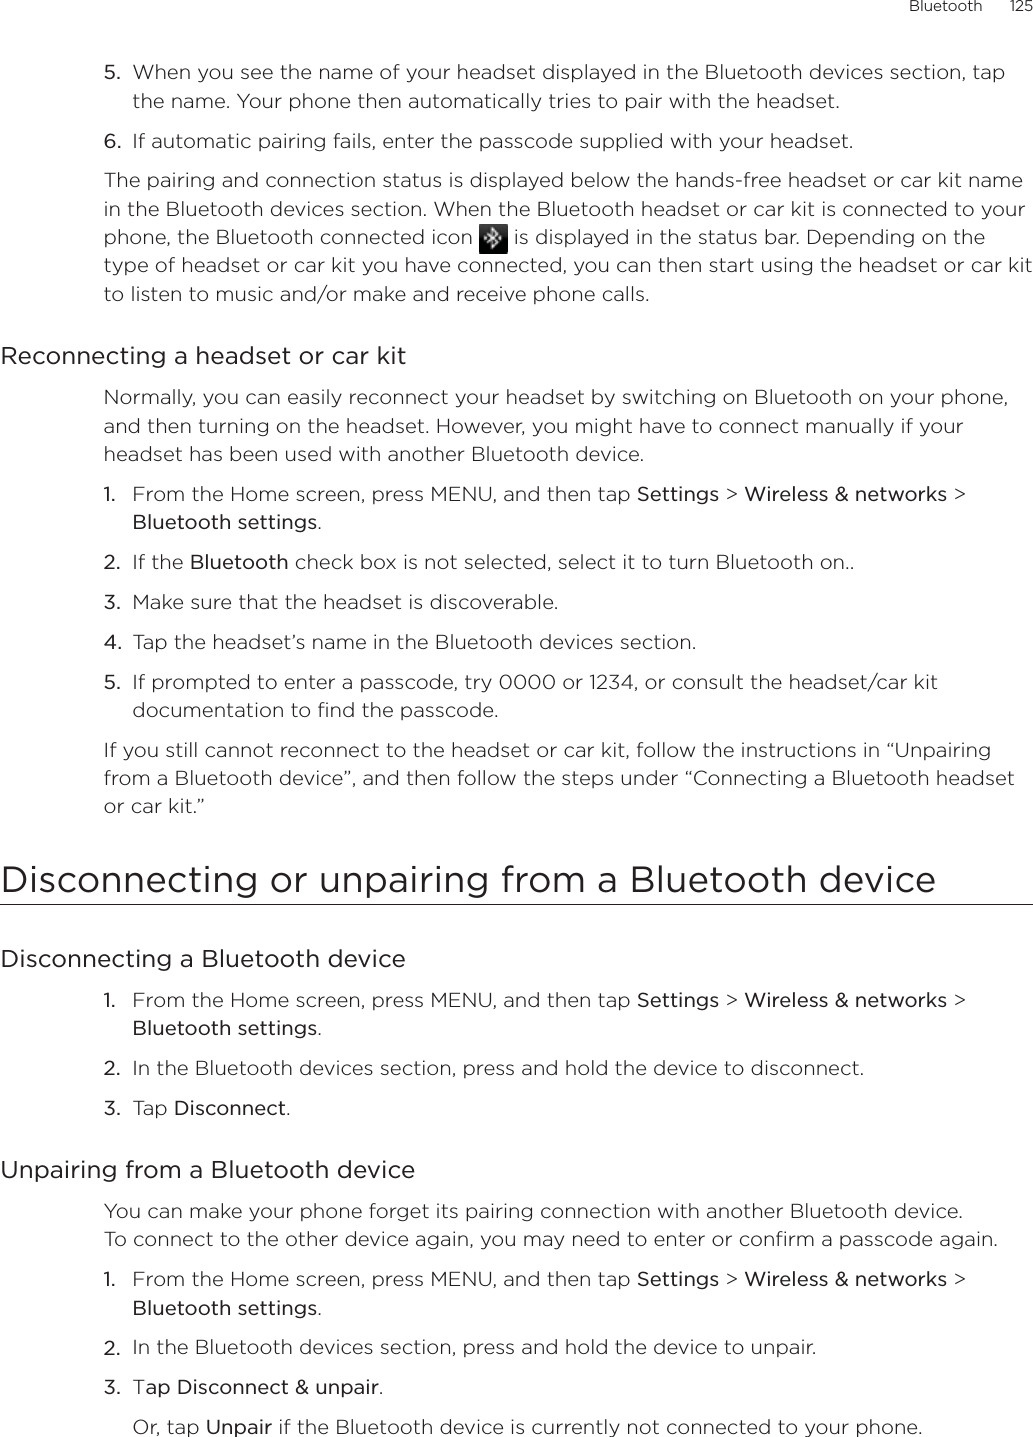 Bluetooth      1255.  When you see the name of your headset displayed in the Bluetooth devices section, tap the name. Your phone then automatically tries to pair with the headset.6.  If automatic pairing fails, enter the passcode supplied with your headset.The pairing and connection status is displayed below the hands-free headset or car kit name in the Bluetooth devices section. When the Bluetooth headset or car kit is connected to your phone, the Bluetooth connected icon   is displayed in the status bar. Depending on the type of headset or car kit you have connected, you can then start using the headset or car kit to listen to music and/or make and receive phone calls.Reconnecting a headset or car kitNormally, you can easily reconnect your headset by switching on Bluetooth on your phone, and then turning on the headset. However, you might have to connect manually if your headset has been used with another Bluetooth device.From the Home screen, press MENU, and then tap Settings &gt; Wireless &amp; networks &gt; Bluetooth settings.If the Bluetooth check box is not selected, select it to turn Bluetooth on..Make sure that the headset is discoverable.Tap the headset’s name in the Bluetooth devices section.If prompted to enter a passcode, try 0000 or 1234, or consult the headset/car kit documentation to find the passcode.If you still cannot reconnect to the headset or car kit, follow the instructions in “Unpairing from a Bluetooth device”, and then follow the steps under “Connecting a Bluetooth headset or car kit.”Disconnecting or unpairing from a Bluetooth deviceDisconnecting a Bluetooth deviceFrom the Home screen, press MENU, and then tap Settings &gt; Wireless &amp; networks &gt; Bluetooth settings.In the Bluetooth devices section, press and hold the device to disconnect.Tap Disconnect.Unpairing from a Bluetooth deviceYou can make your phone forget its pairing connection with another Bluetooth device.  To connect to the other device again, you may need to enter or confirm a passcode again.From the Home screen, press MENU, and then tap Settings &gt; Wireless &amp; networks &gt; Bluetooth settings.In the Bluetooth devices section, press and hold the device to unpair.Tap Disconnect &amp; unpair.Or, tap Unpair if the Bluetooth device is currently not connected to your phone.1.2.3.4.5.1.2.3.1.2.3.